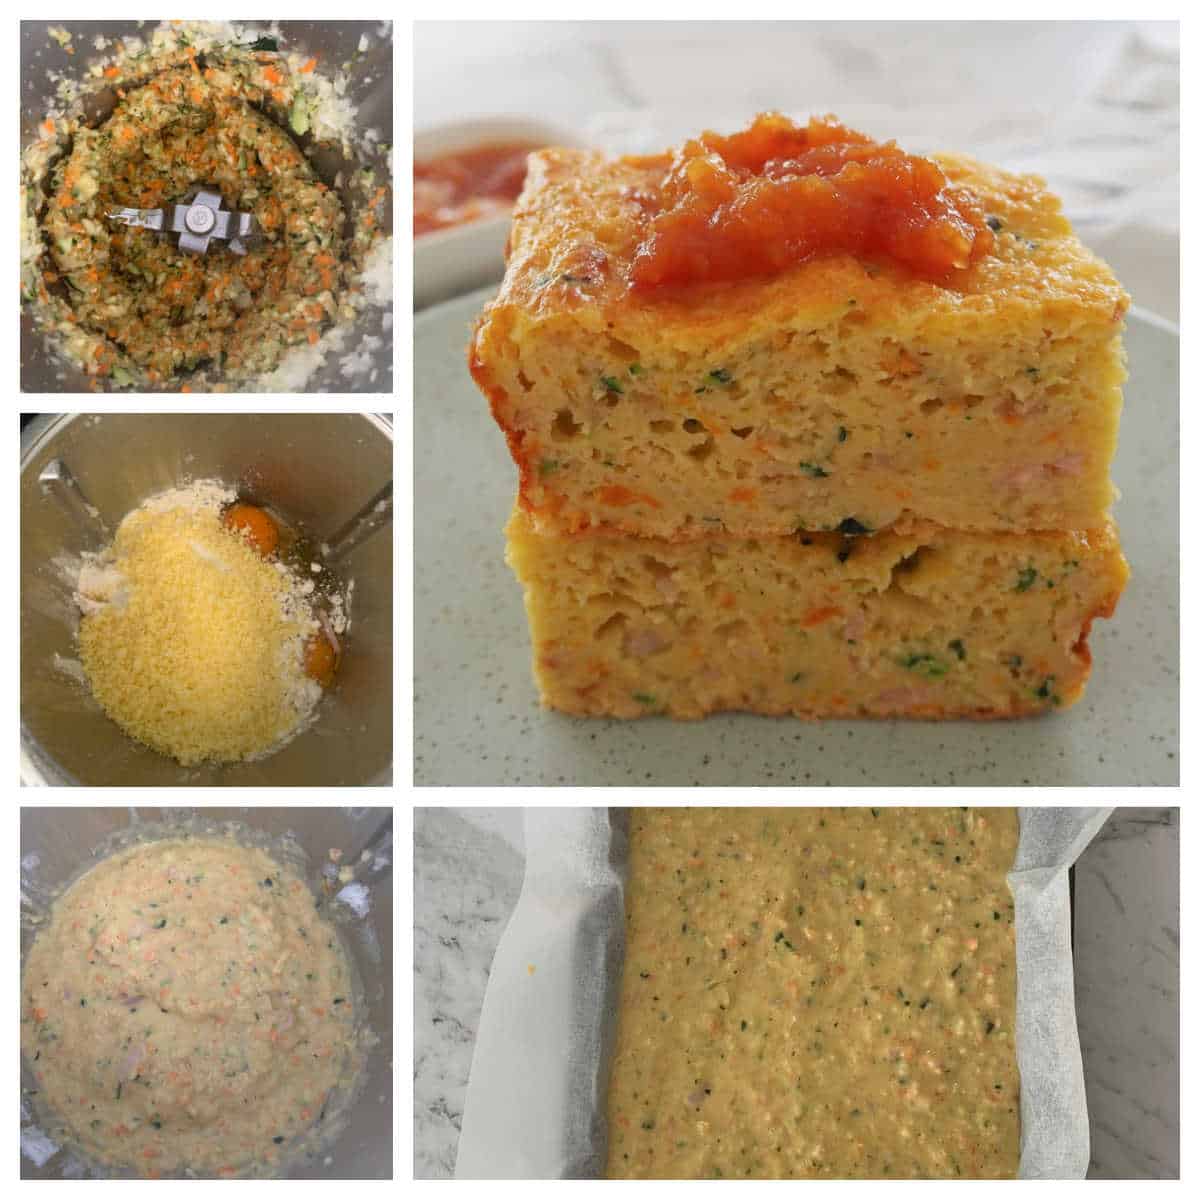 Collage showing steps to make a zucchini slice in a thermomix.